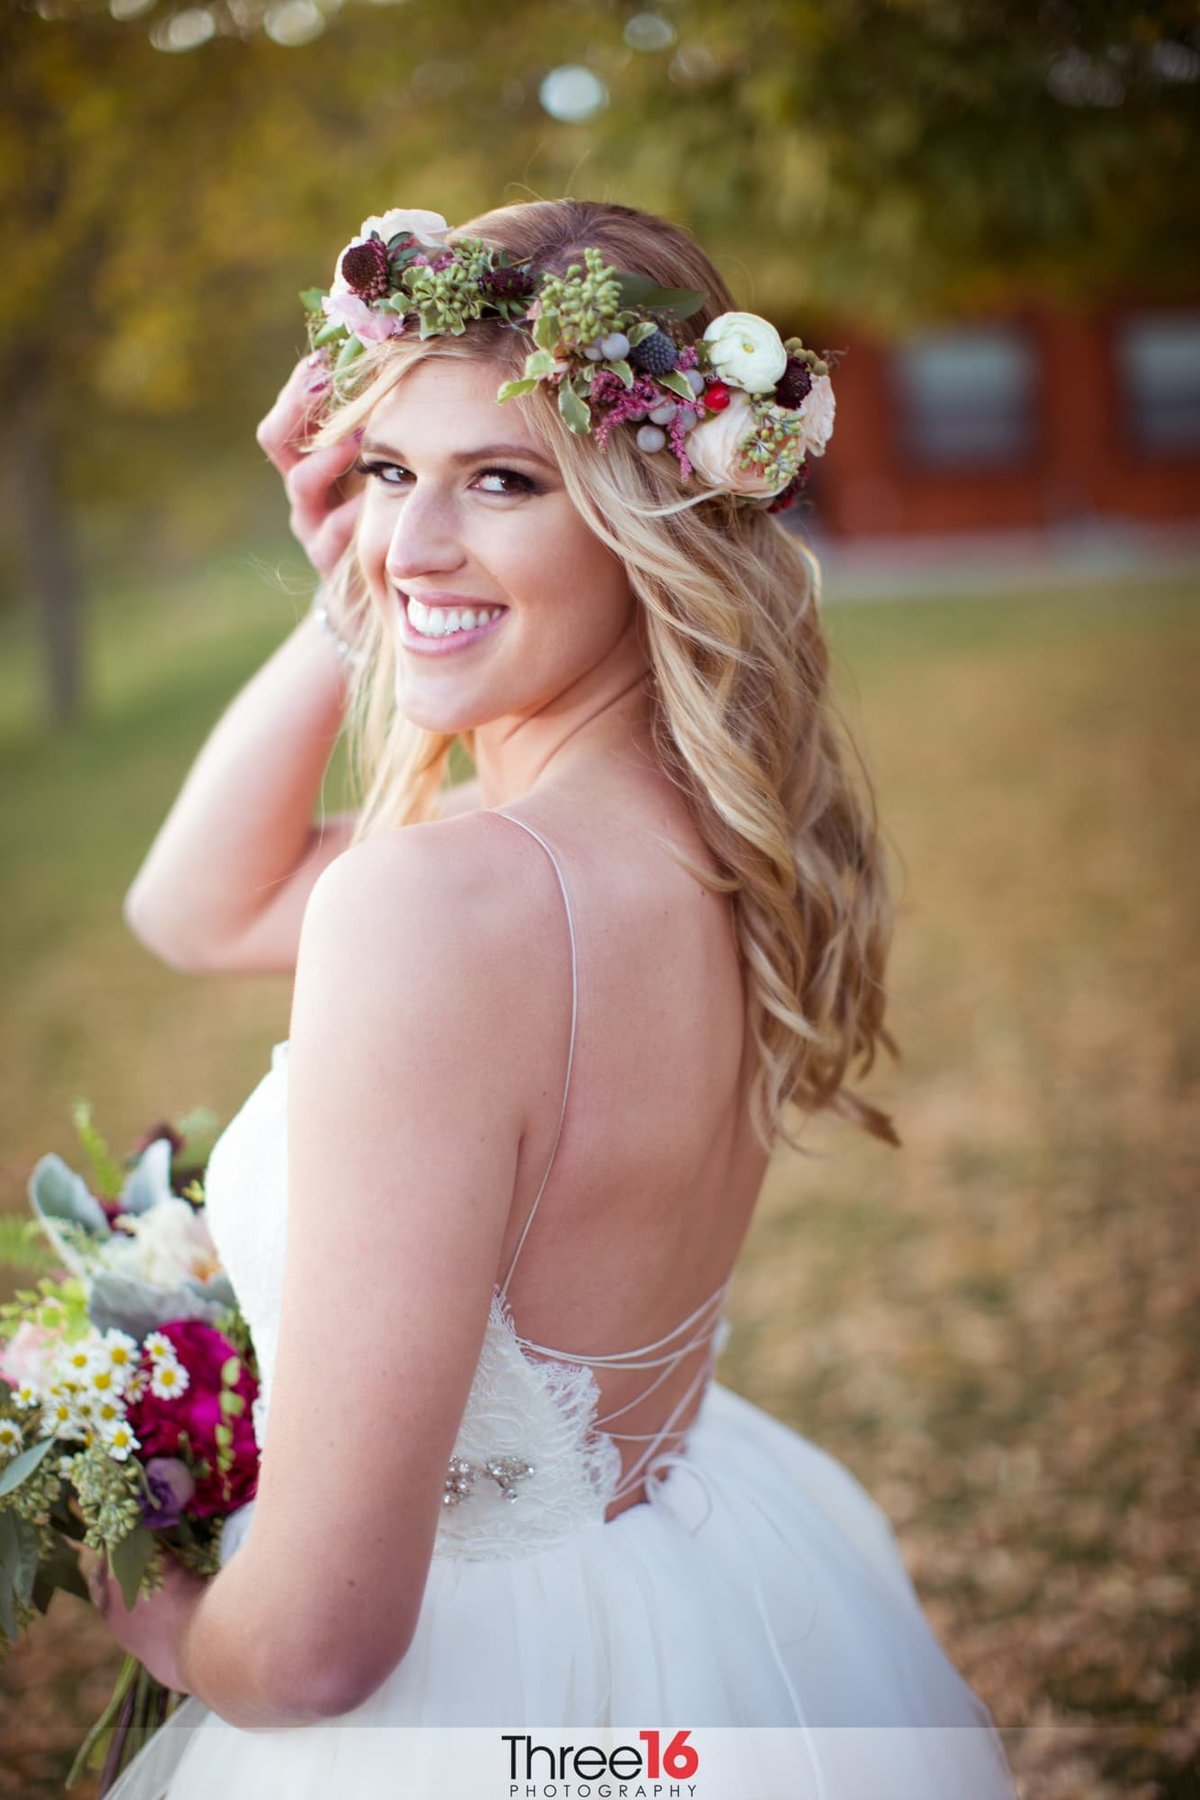 Bride turns and smiles for the camera while holding her bouquet